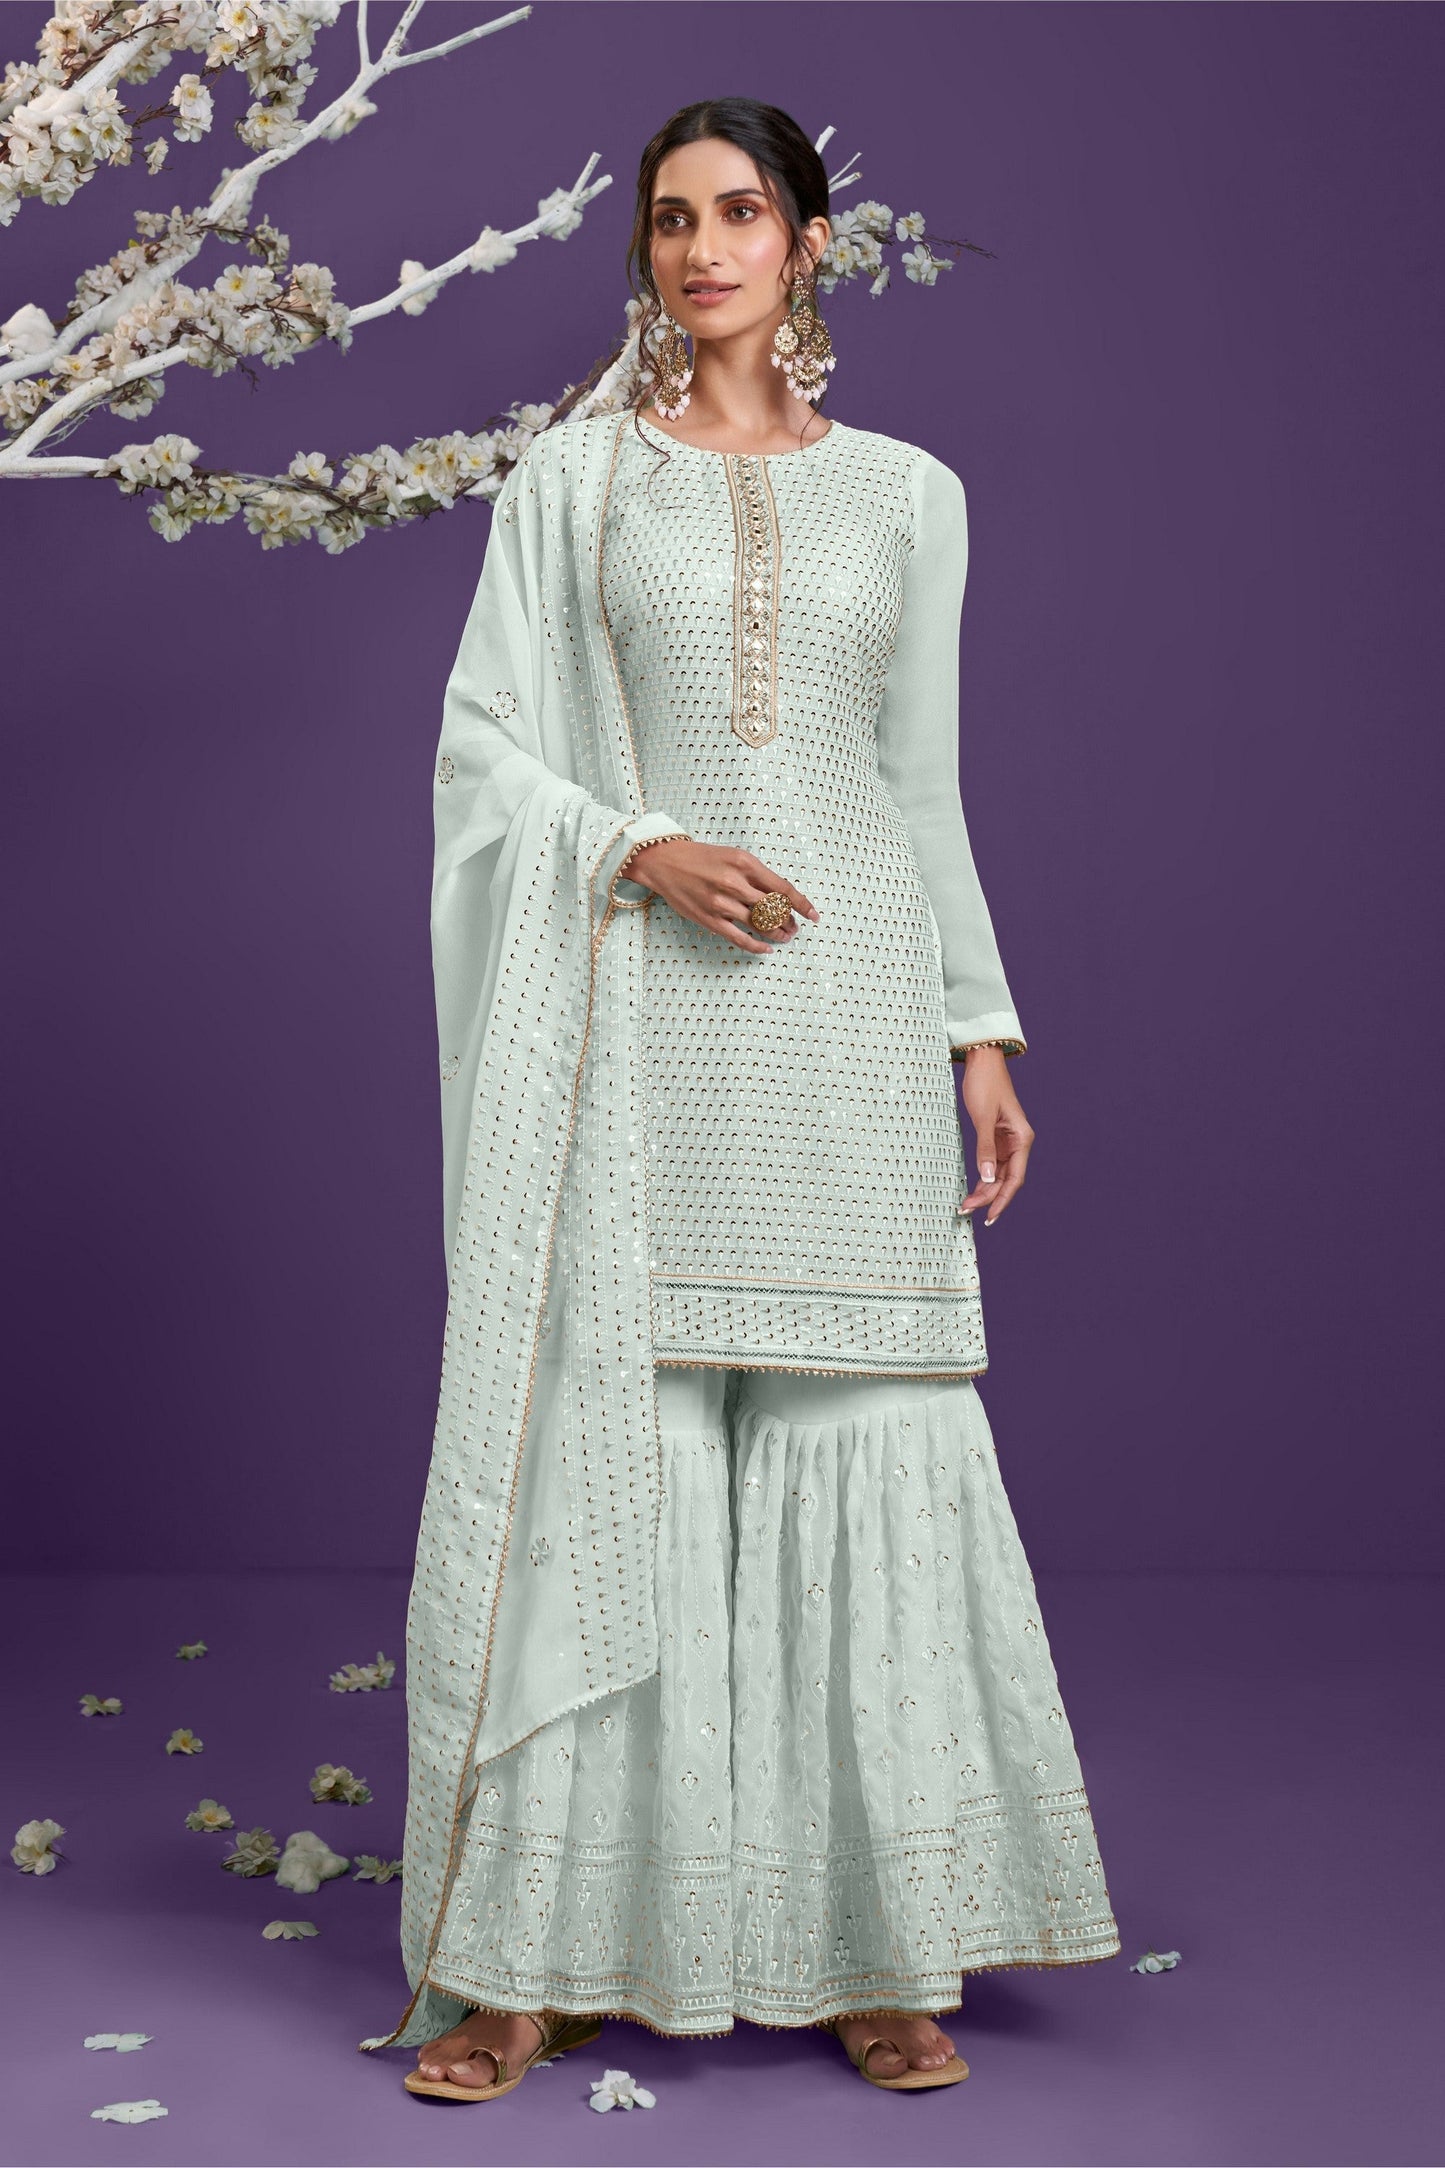 Light Pista Pakistani Georgette Sharara For Indian Festivals & Weddings - Sequence Embroidery Work, Thread Embroidery Work, Khatli Work,